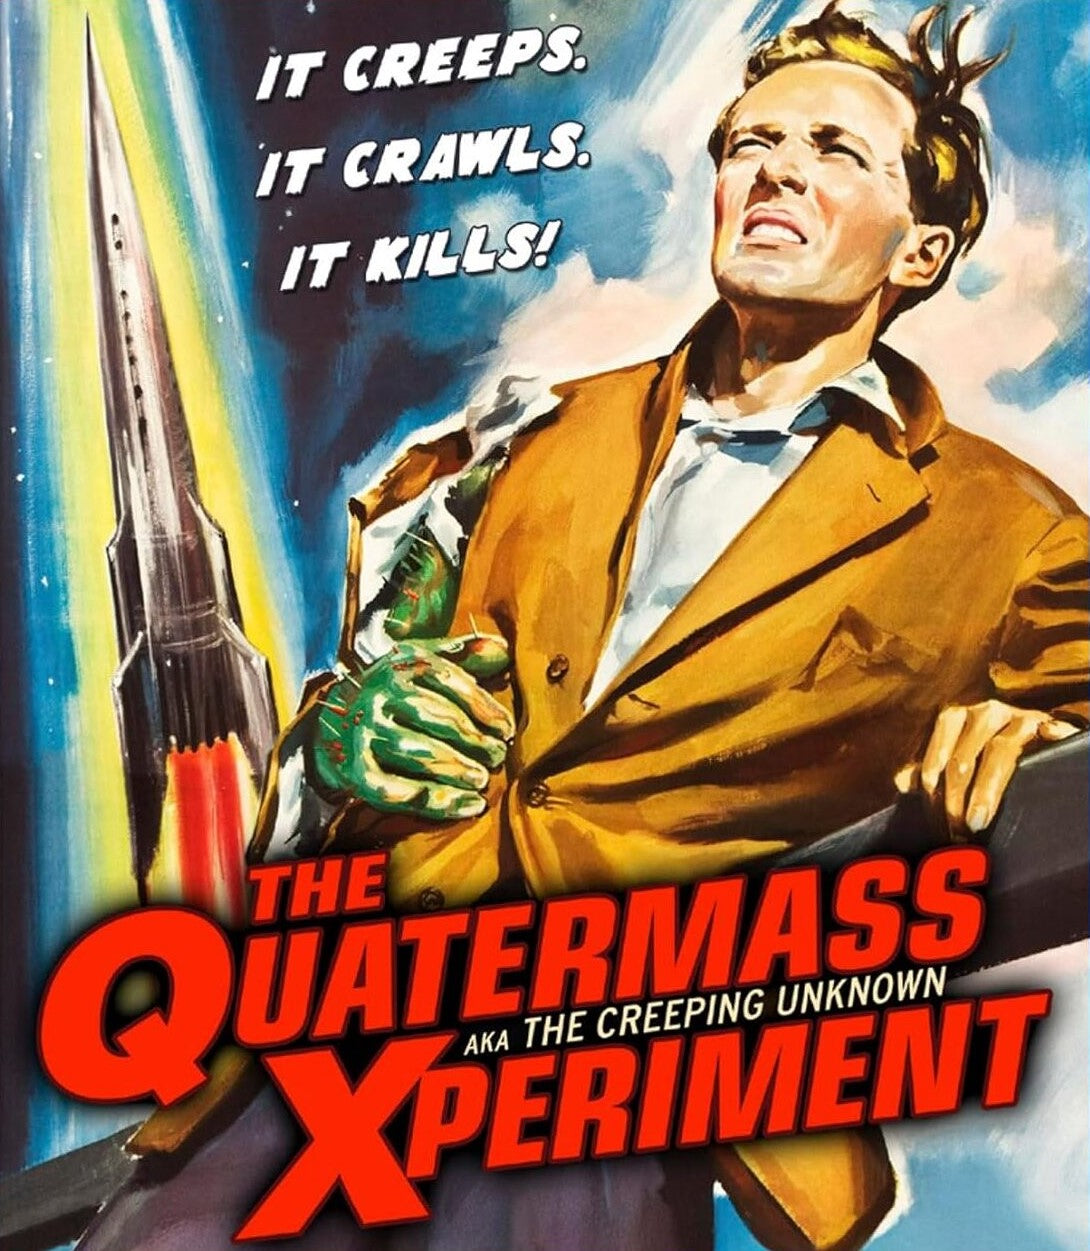 THE QUATERMASS XPERIMENT BLU-RAY